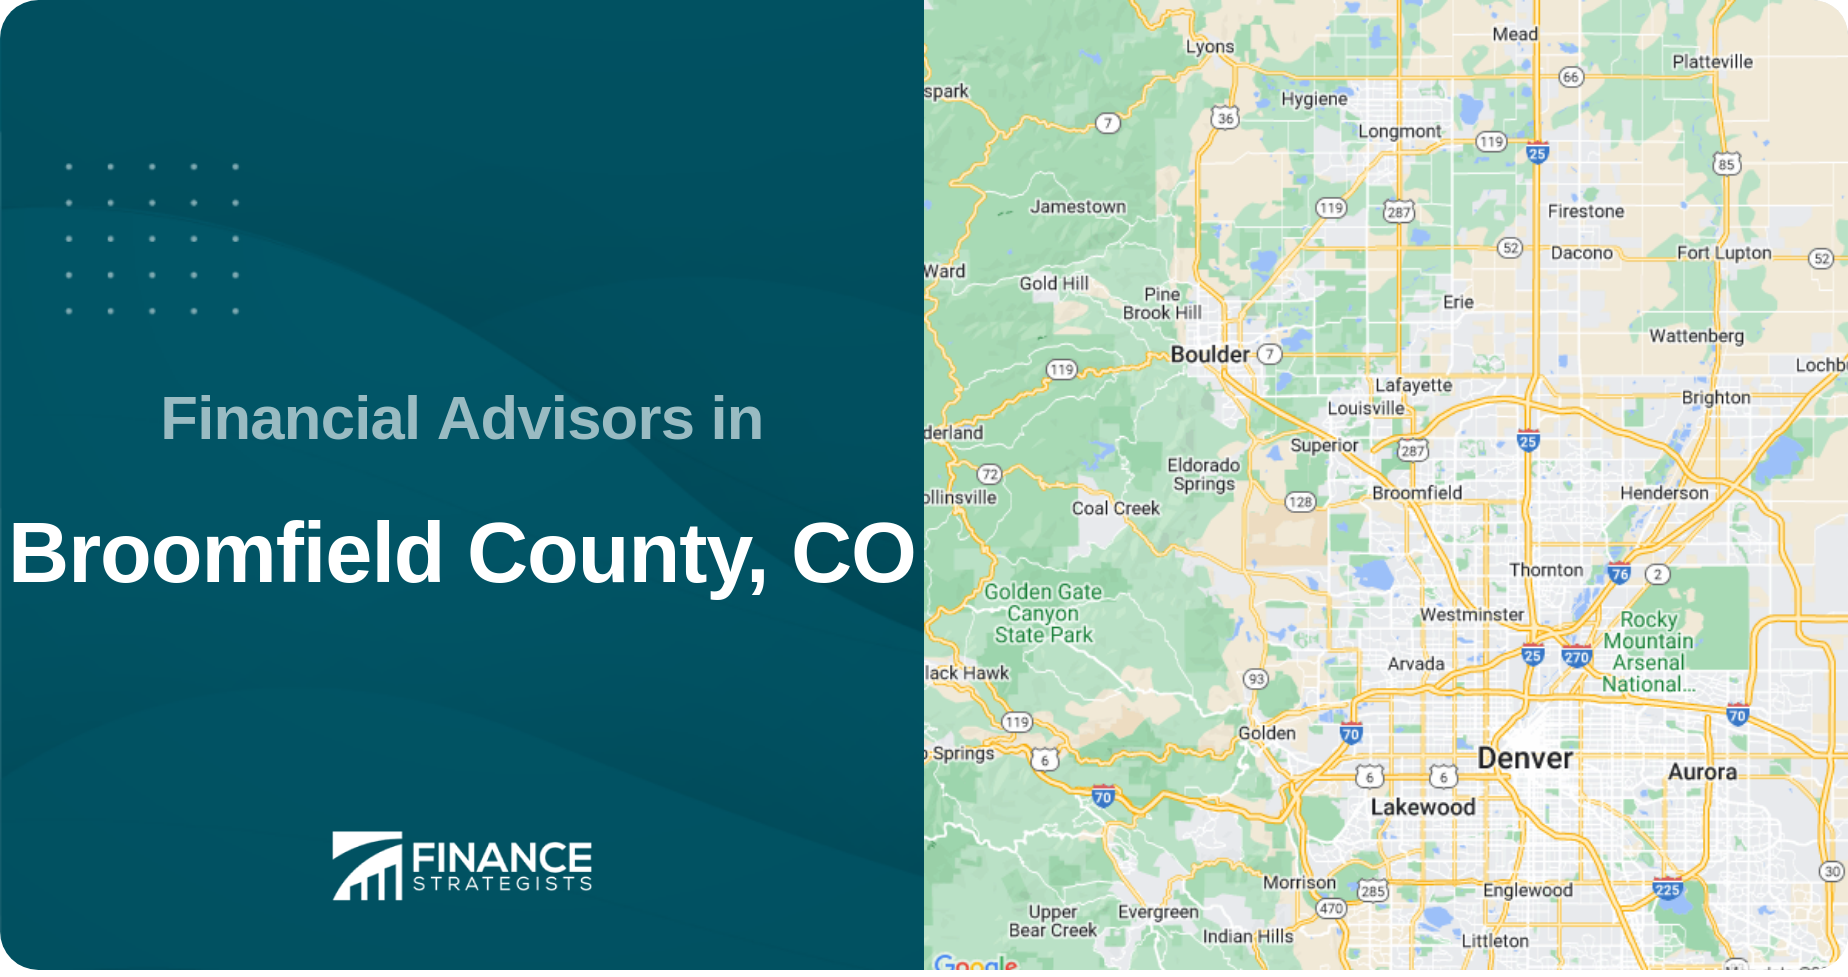 Financial Advisors in Broomfield County, CO